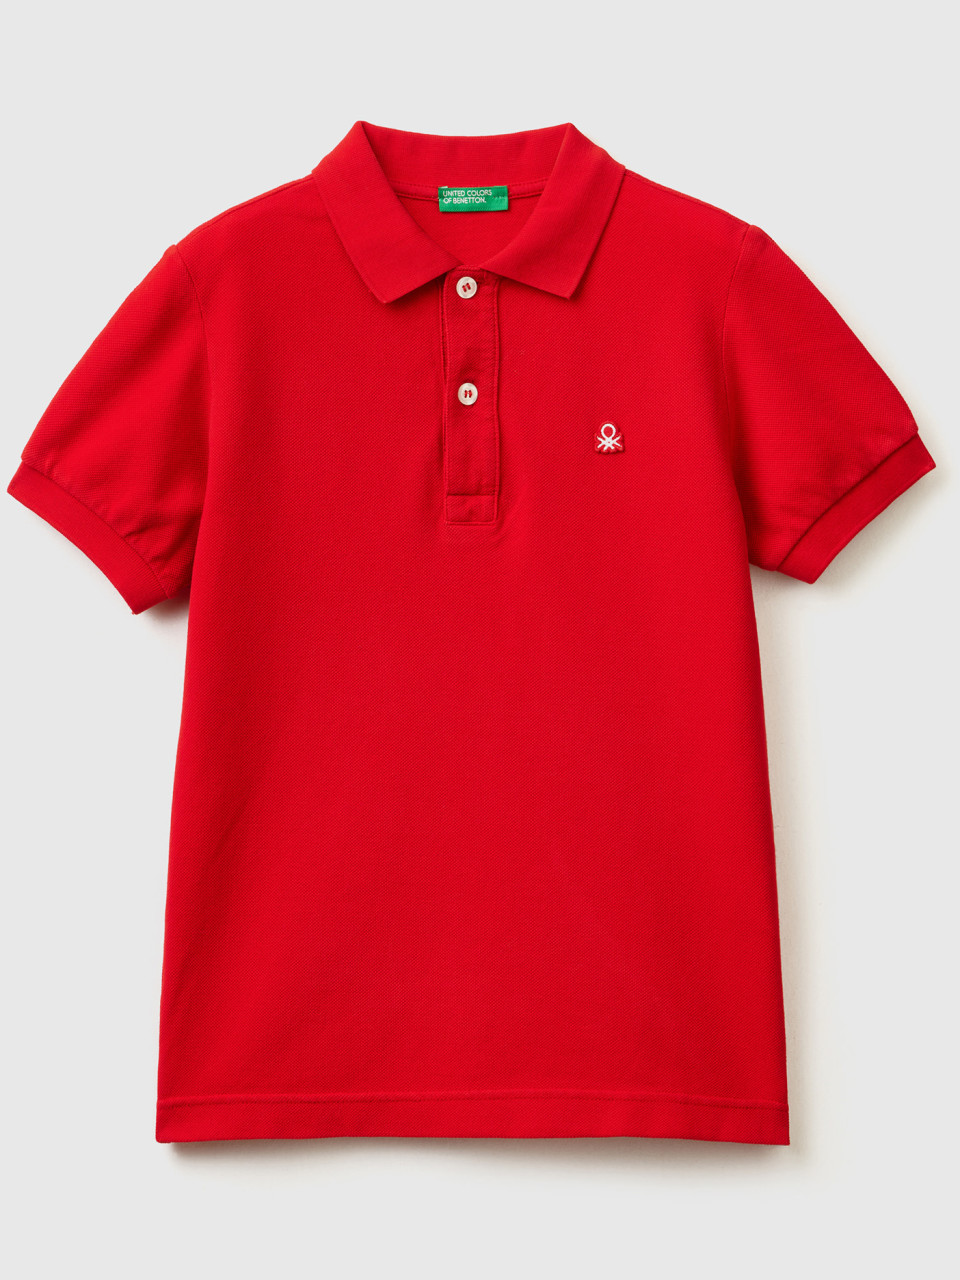 Benetton, Slim Fit Polo In 100% Organic Cotton, Red, Kids